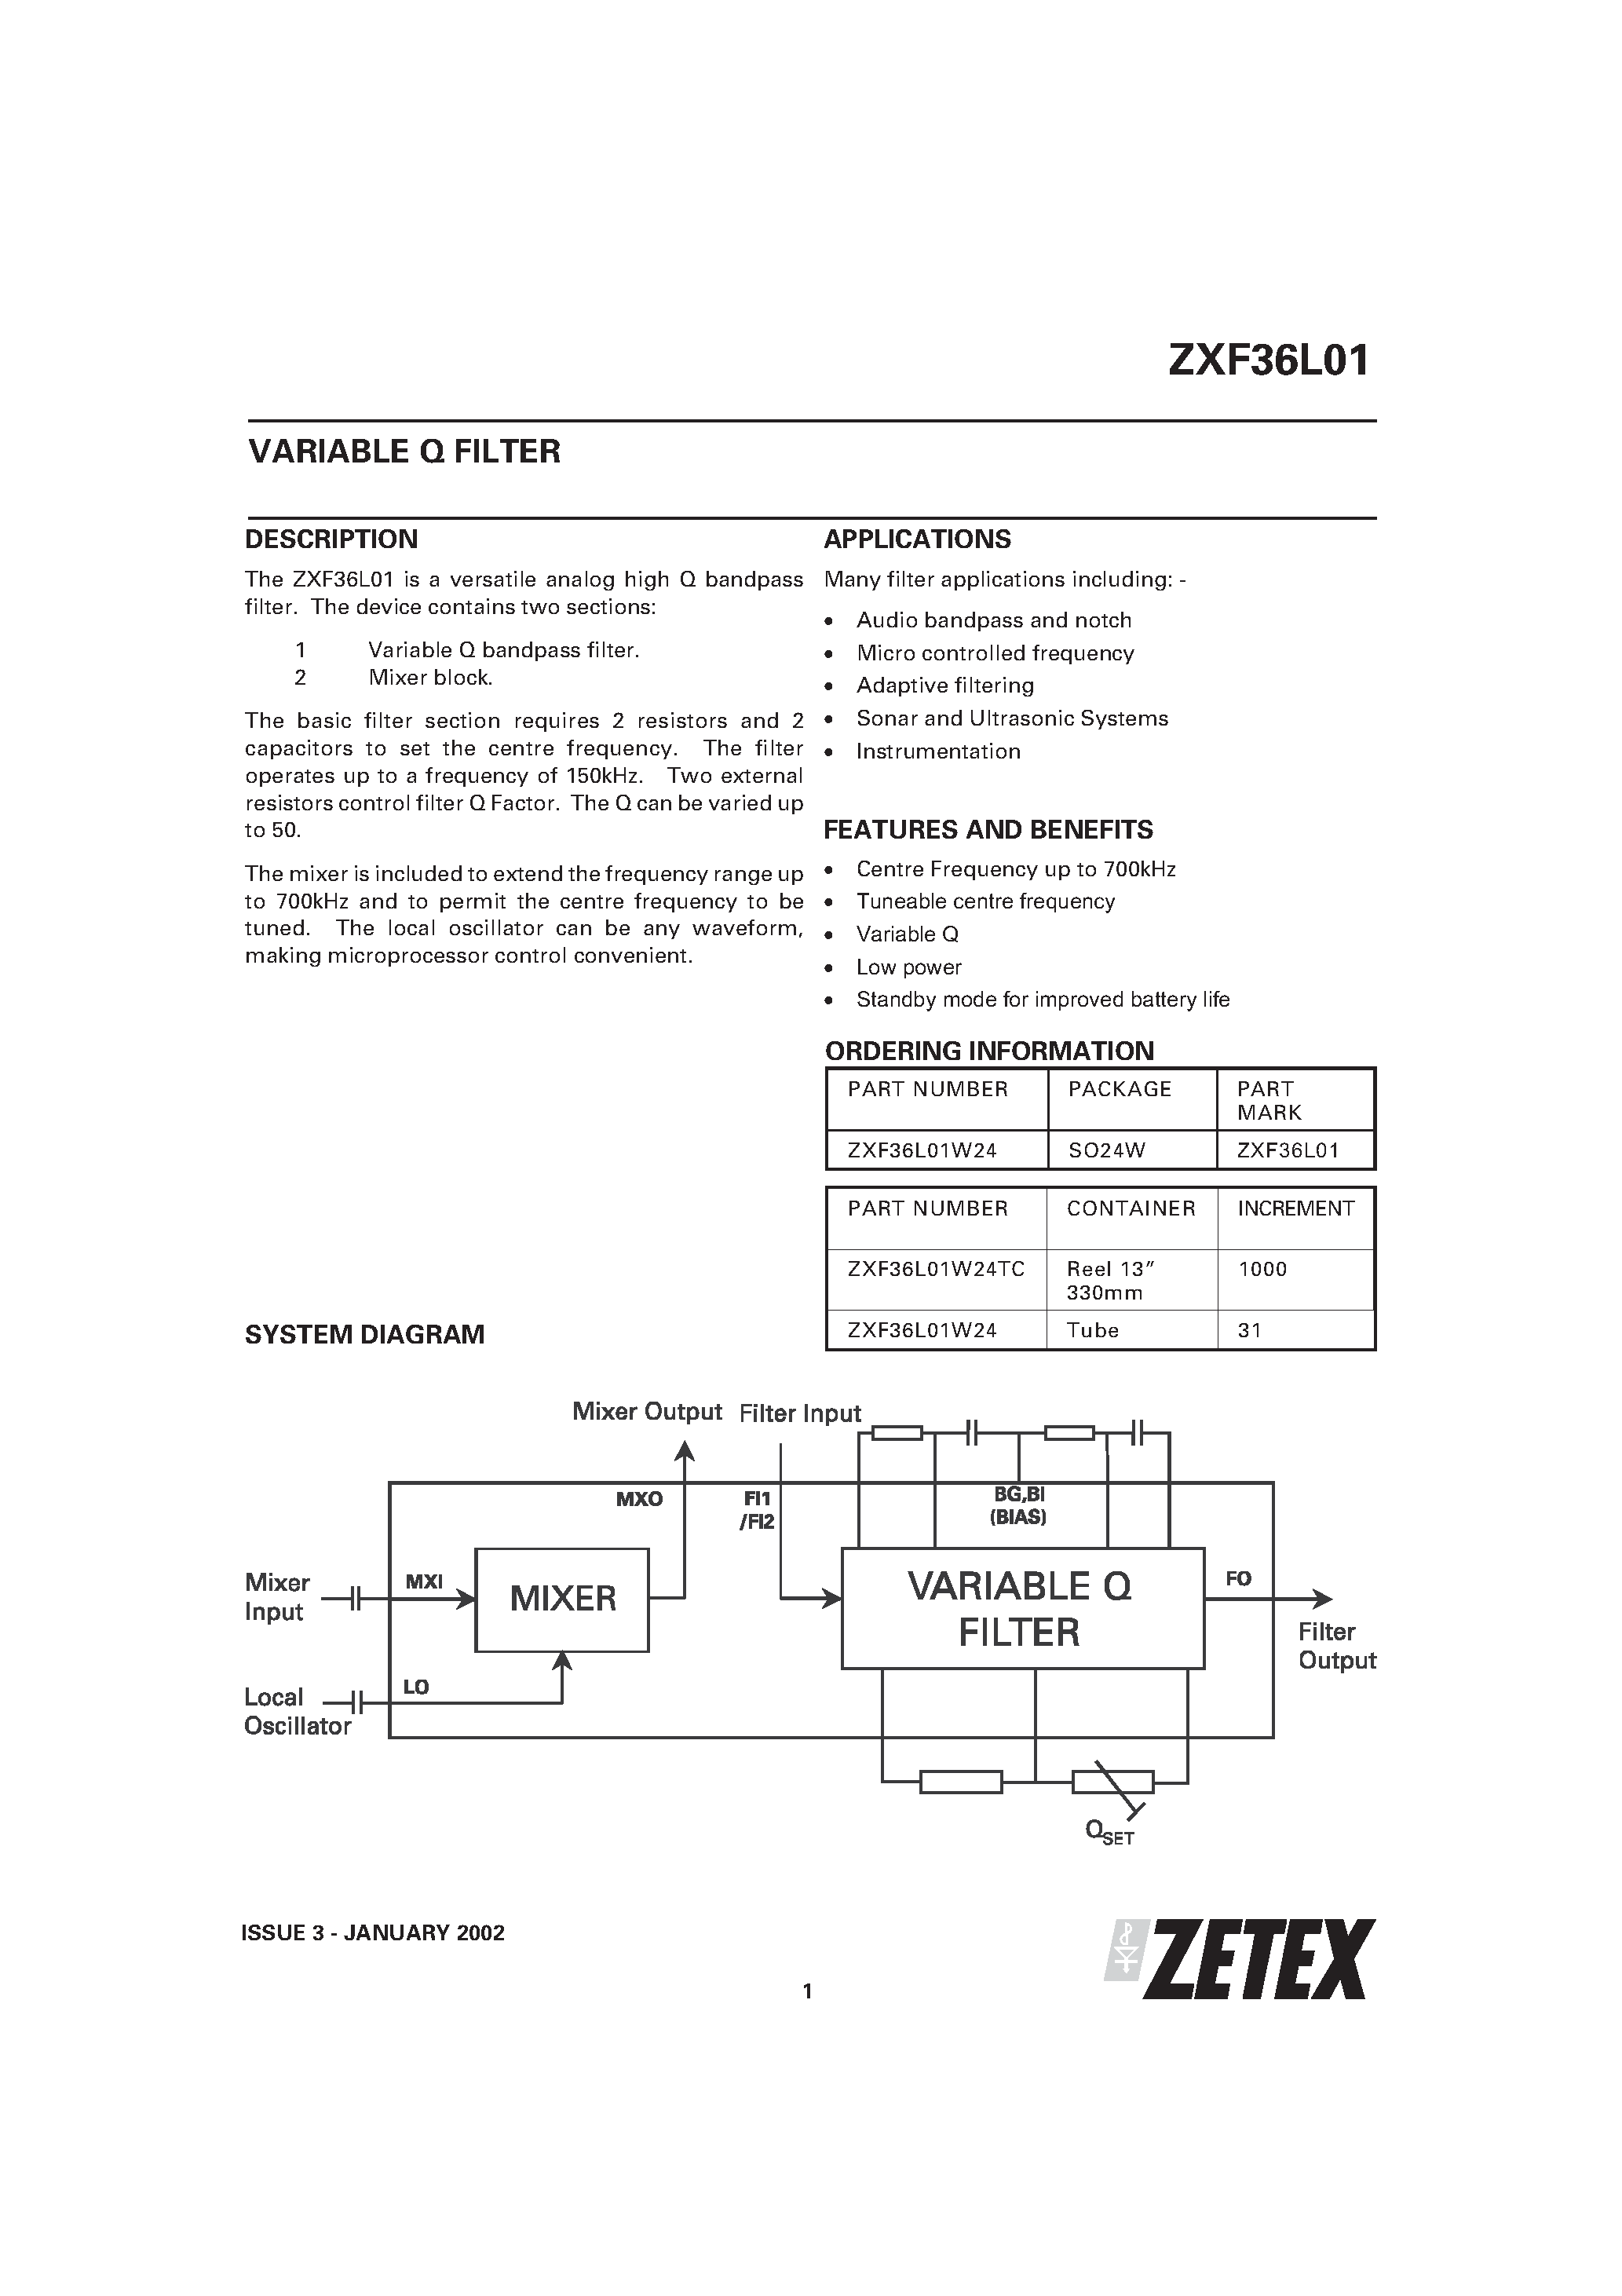 Datasheet ZXF36L01 - VARIABLE Q FILTER page 1